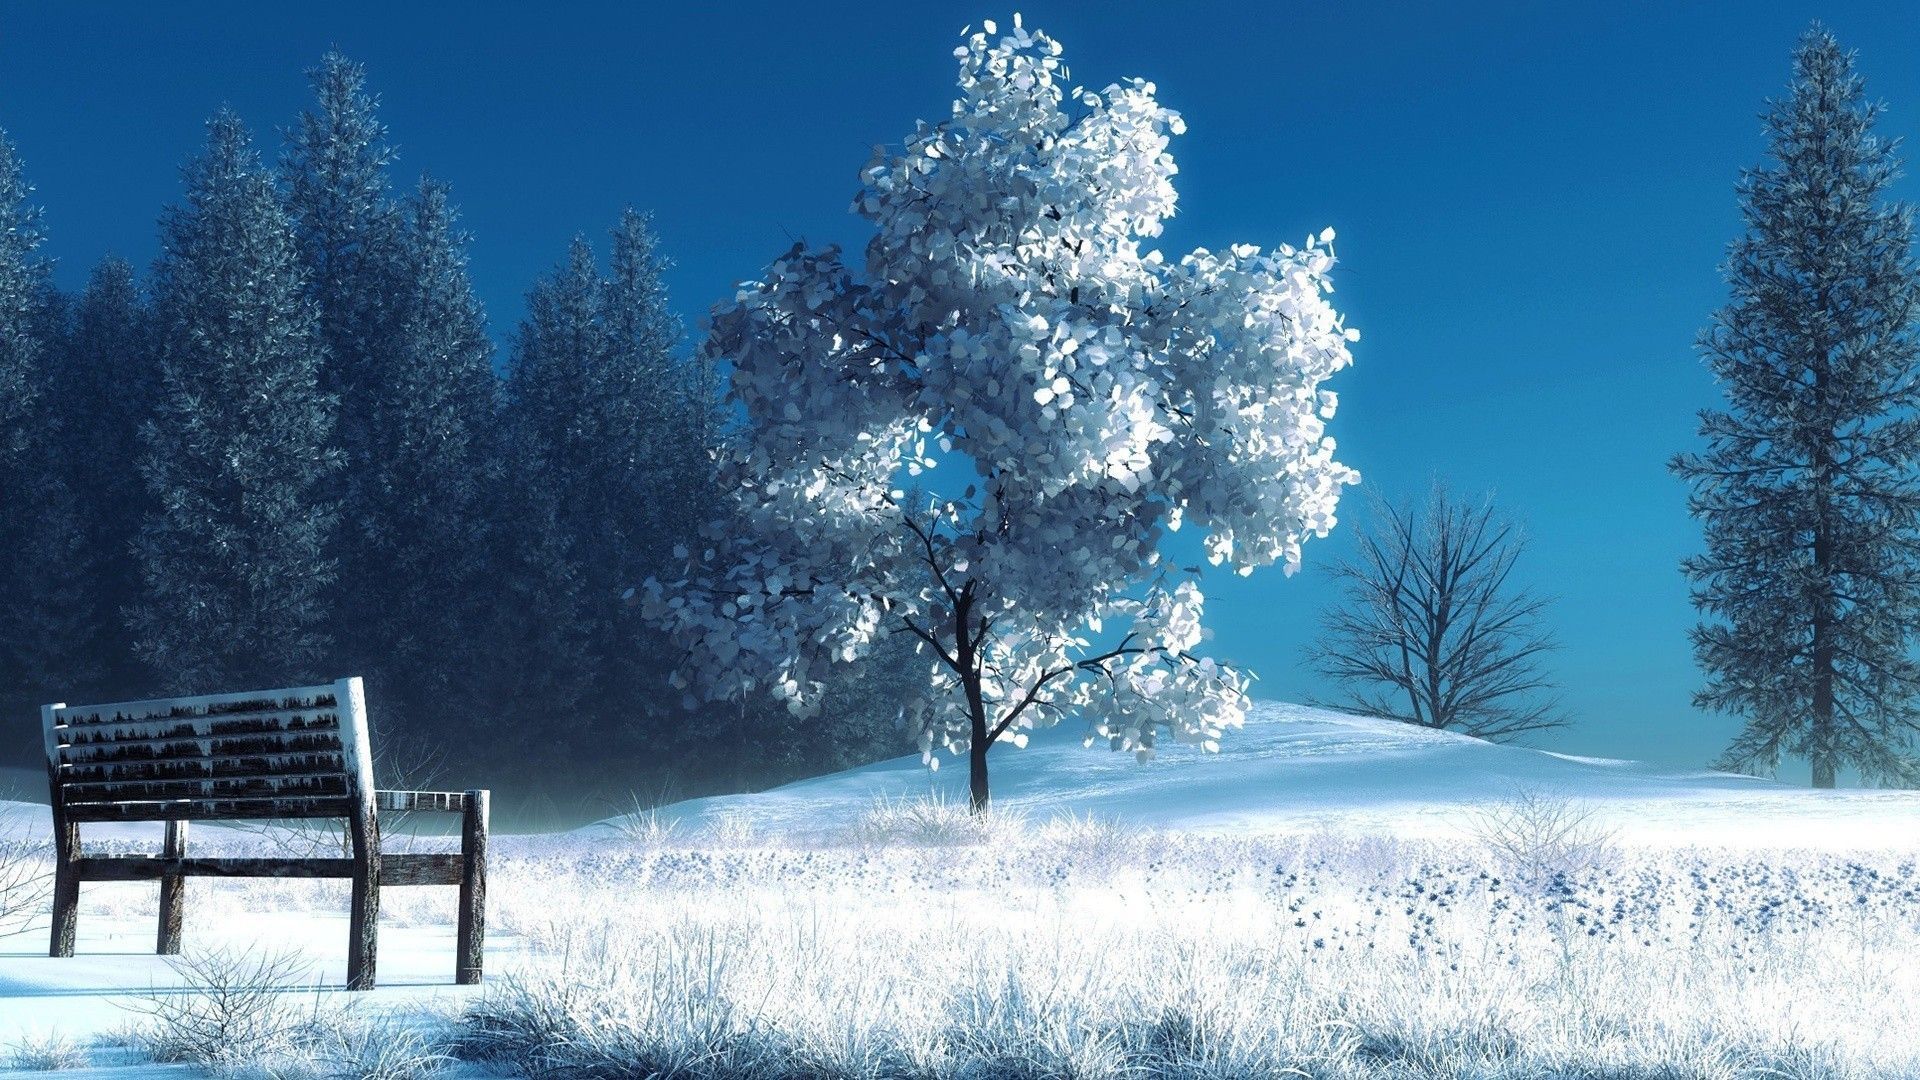 Download Anime Winter Scenery Wallpaper 10 HD Wallpaper 1080p And Share It With More People. Wallpaper Natureza, Ideias De Paisagismo, Lindas Paisagens